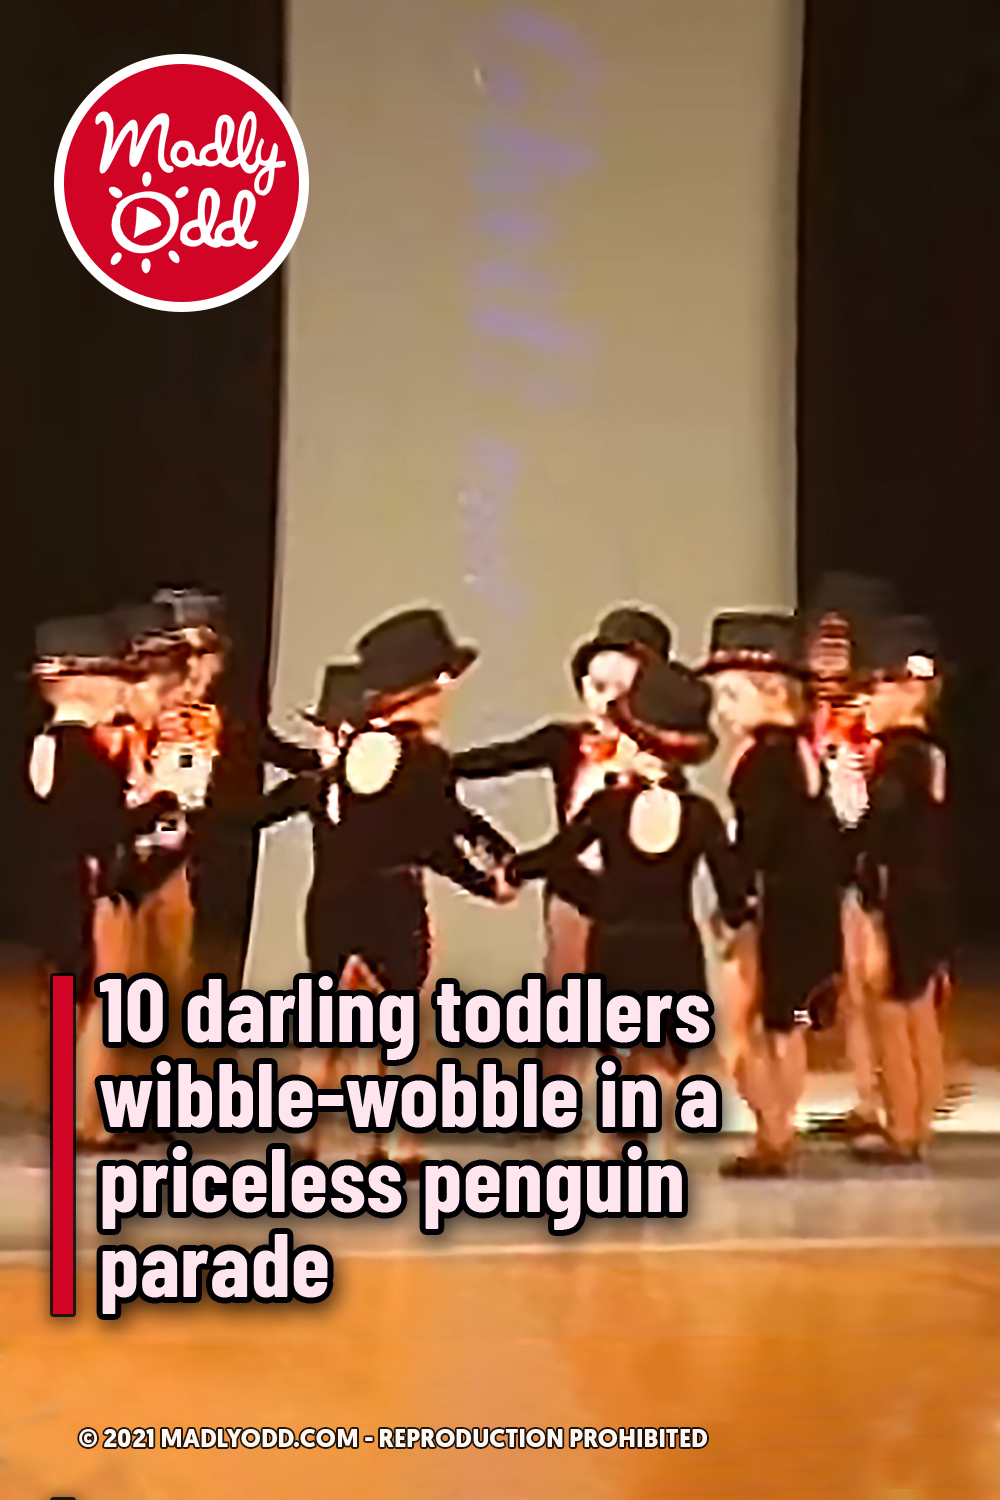 10 darling toddlers wibble-wobble in a priceless penguin parade